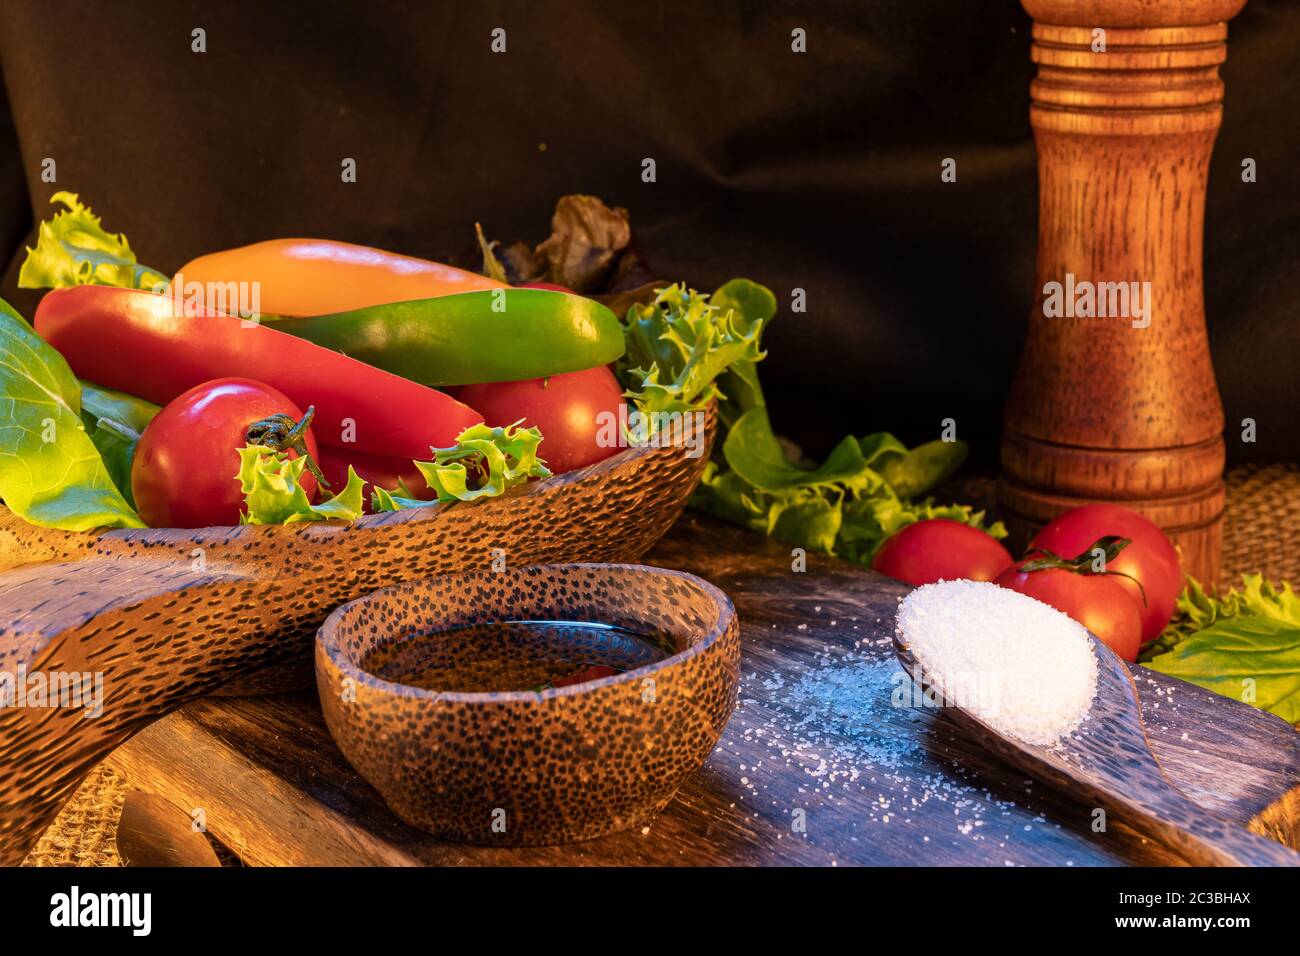 Fresh vegetables for natural and nutritious salad Stock Photo